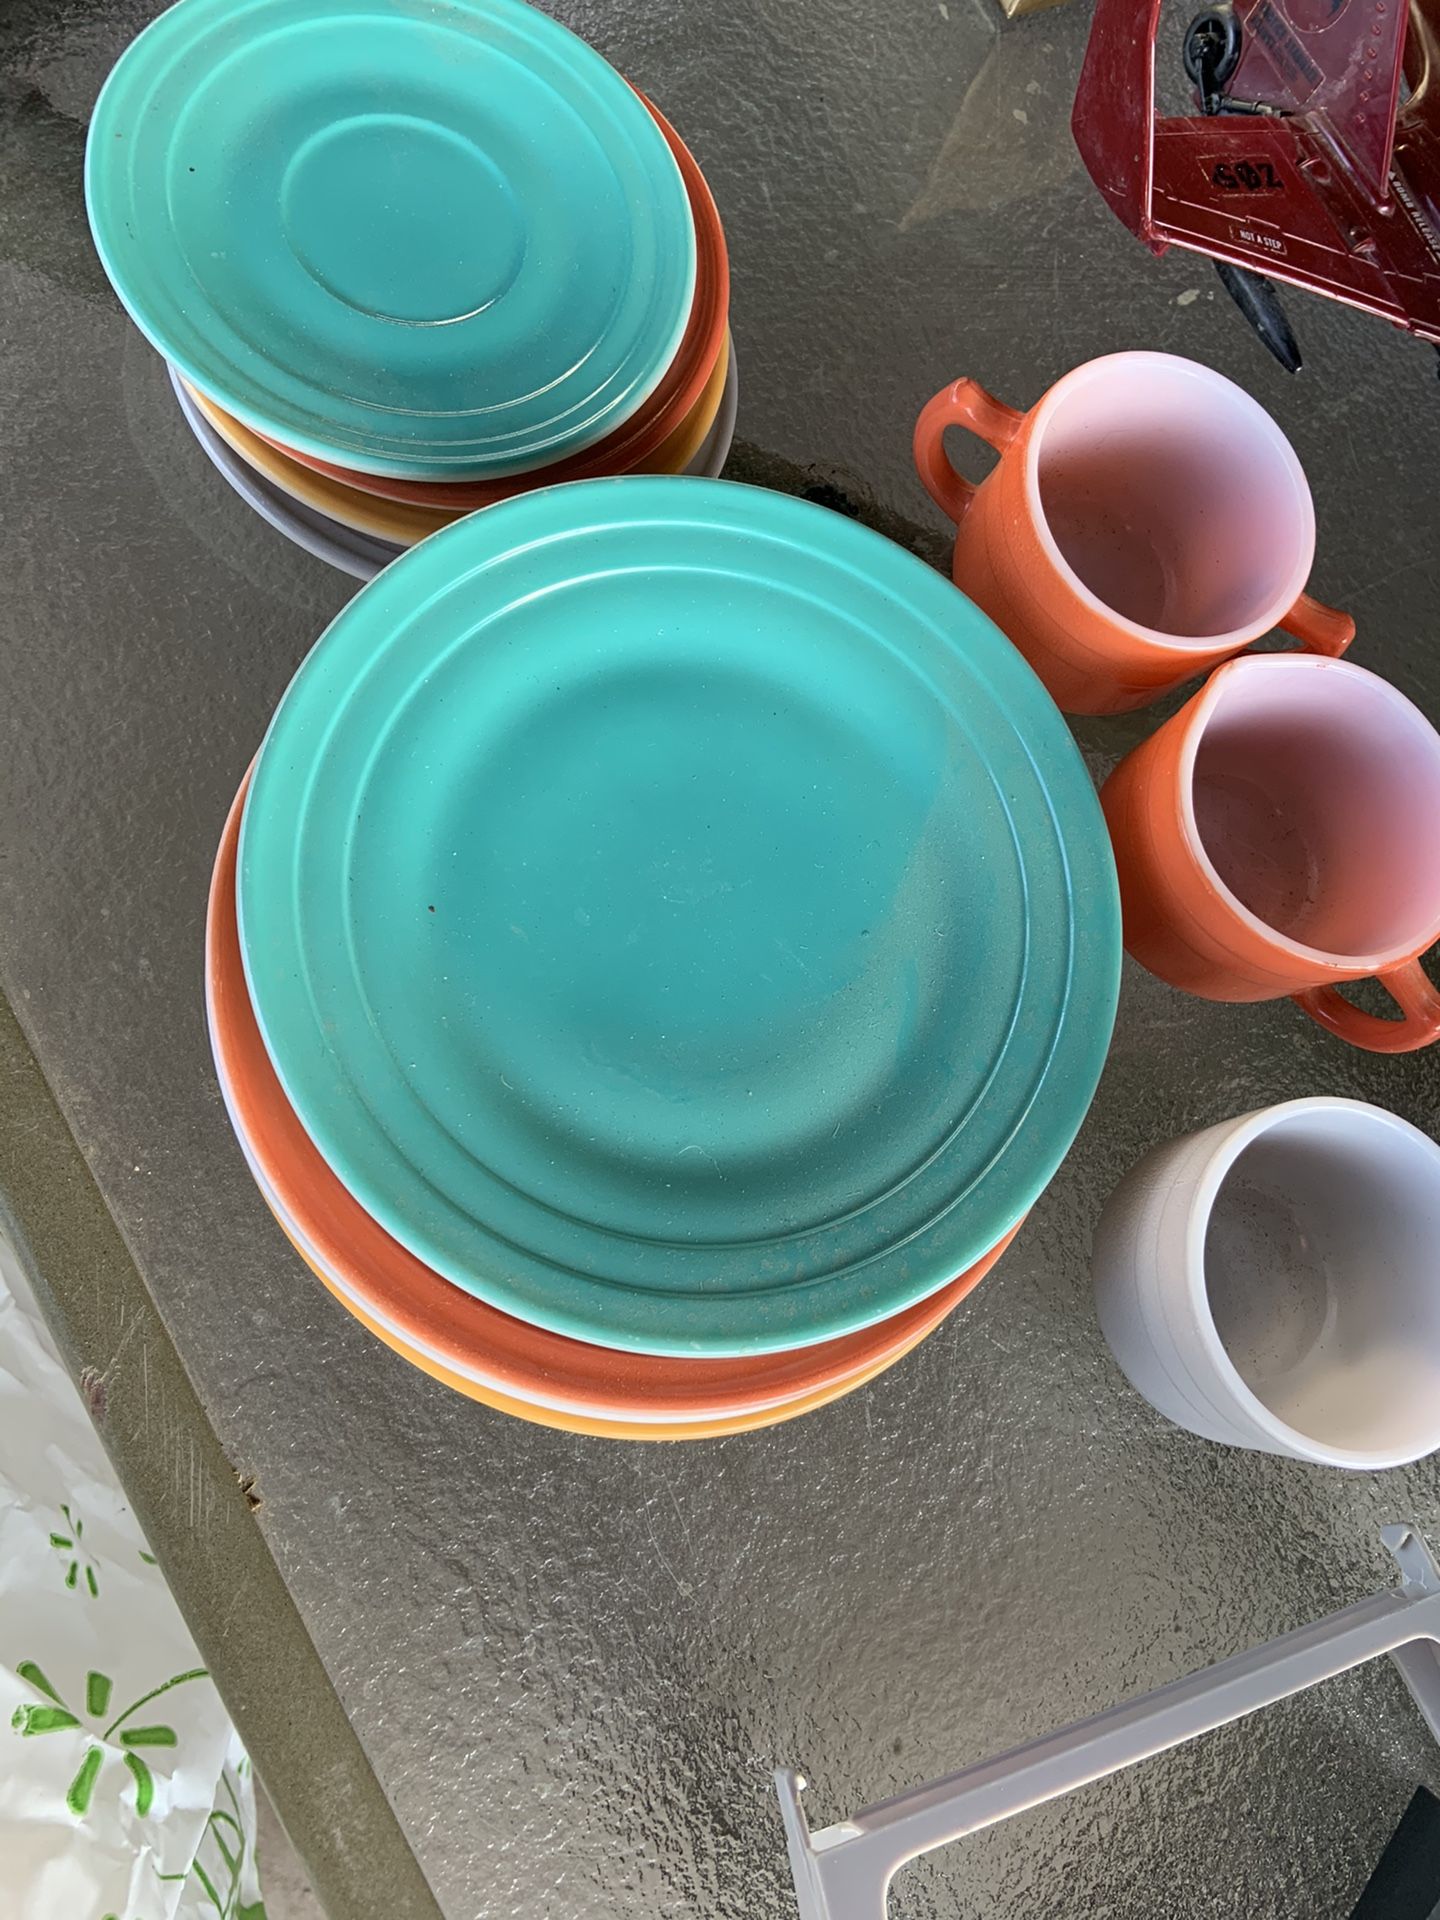 VINTAGE SMALL DISHES